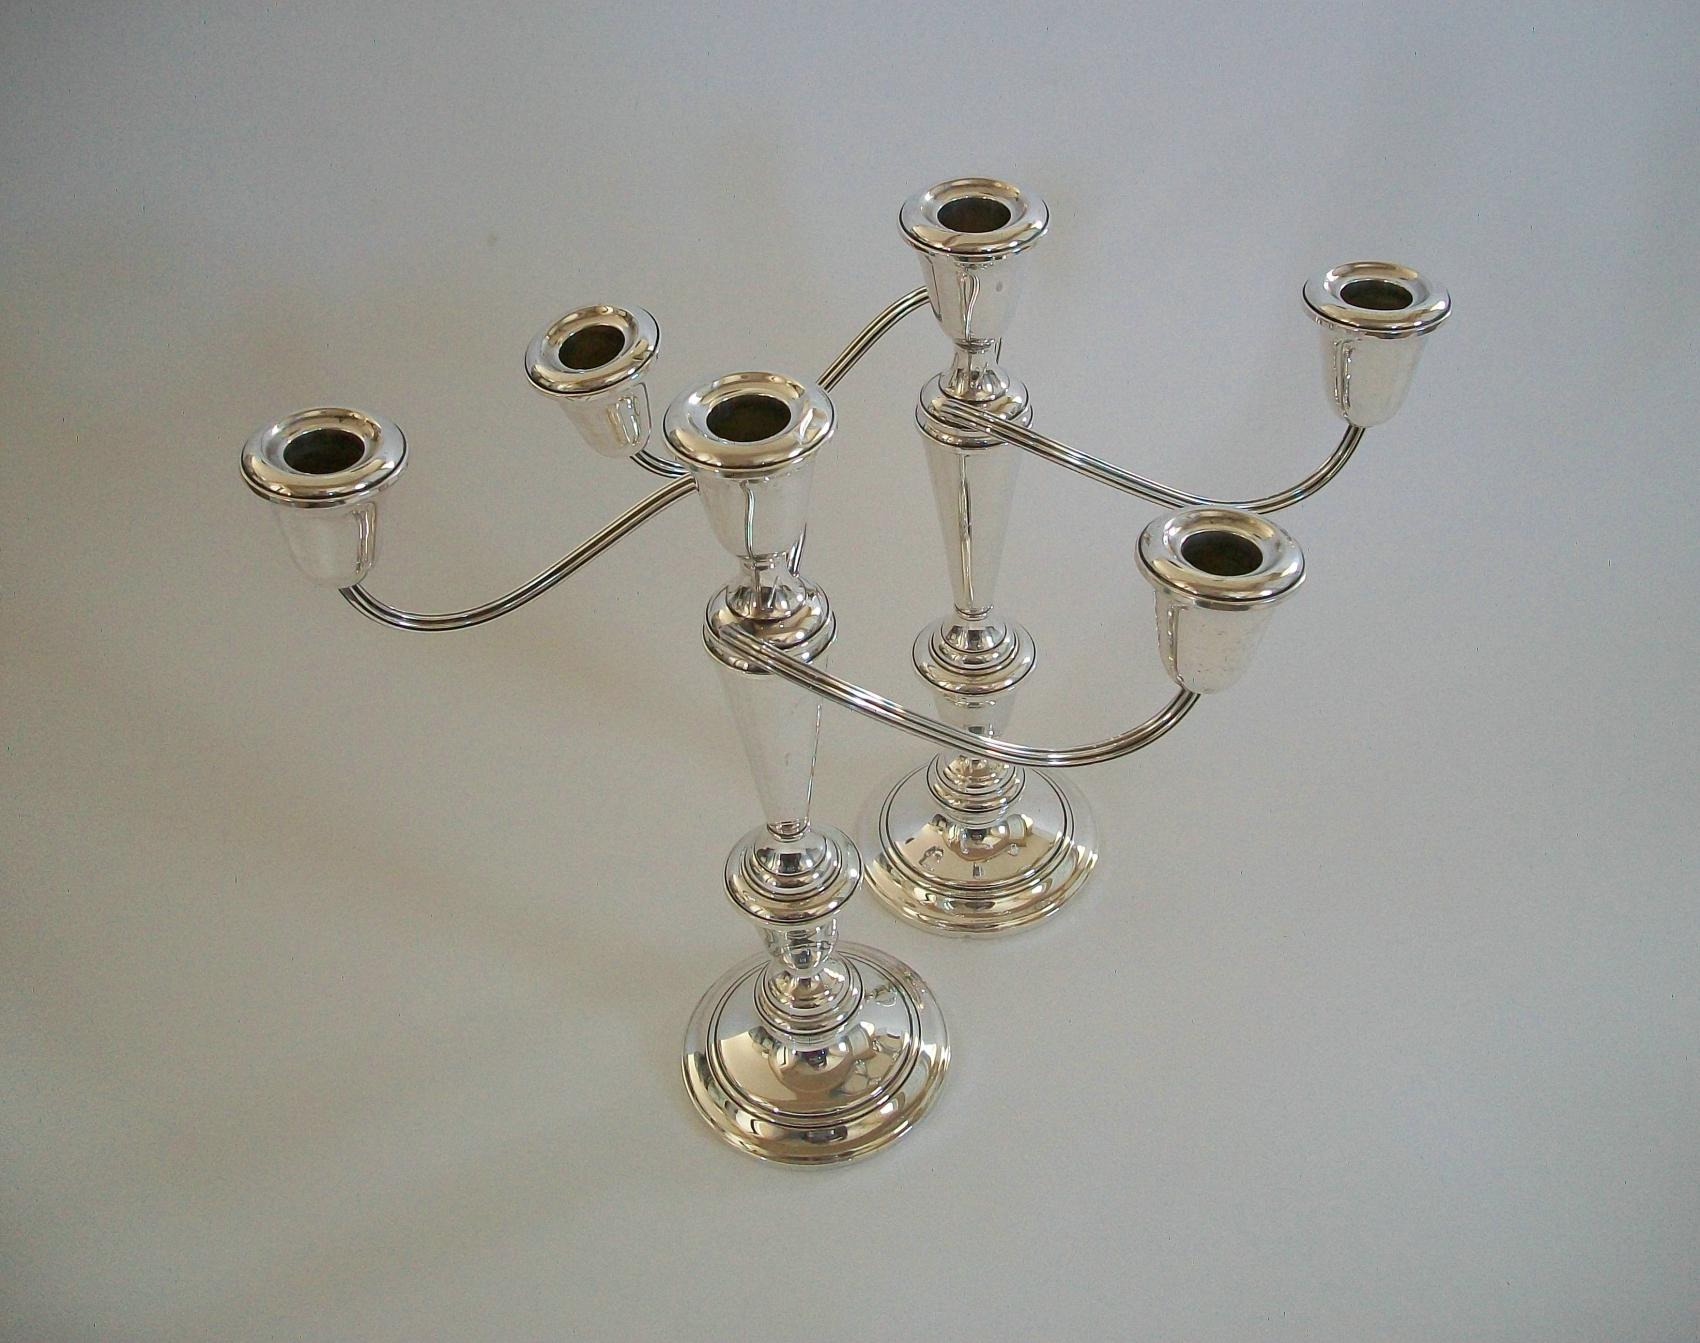 NEWPORT - Pair of Sterling Silver Candelabra - Weighted - U.S.A. - 20th Century For Sale 2